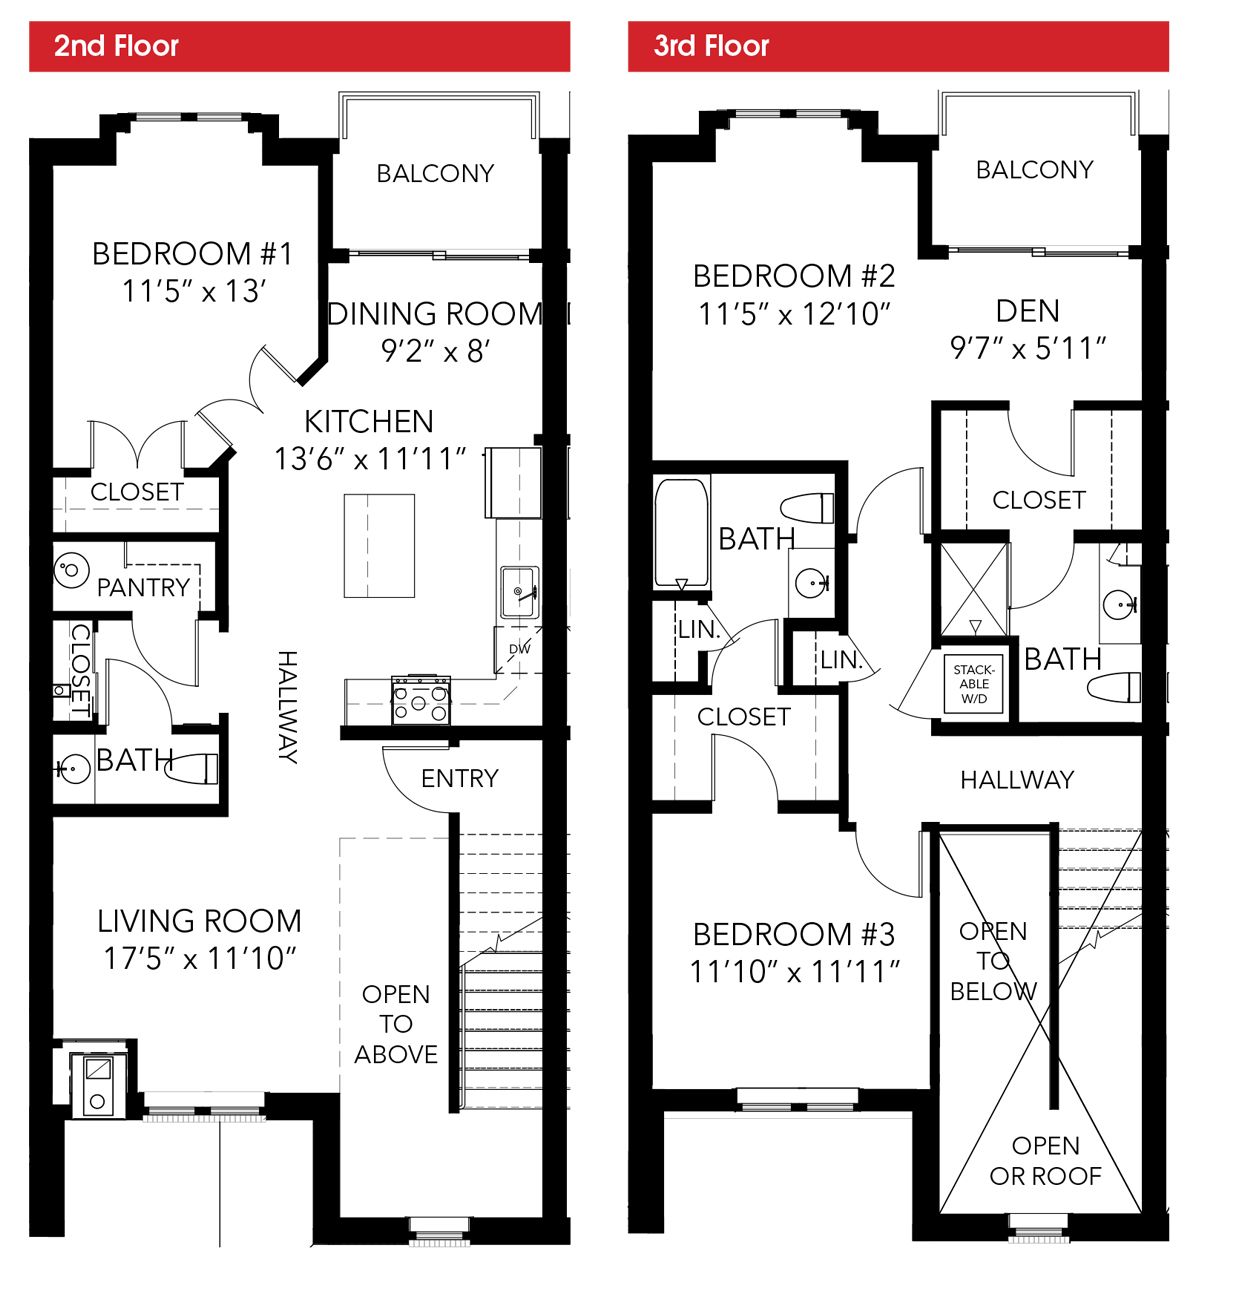 Floor Plans of Corner Park Apartments in West Chester, PA